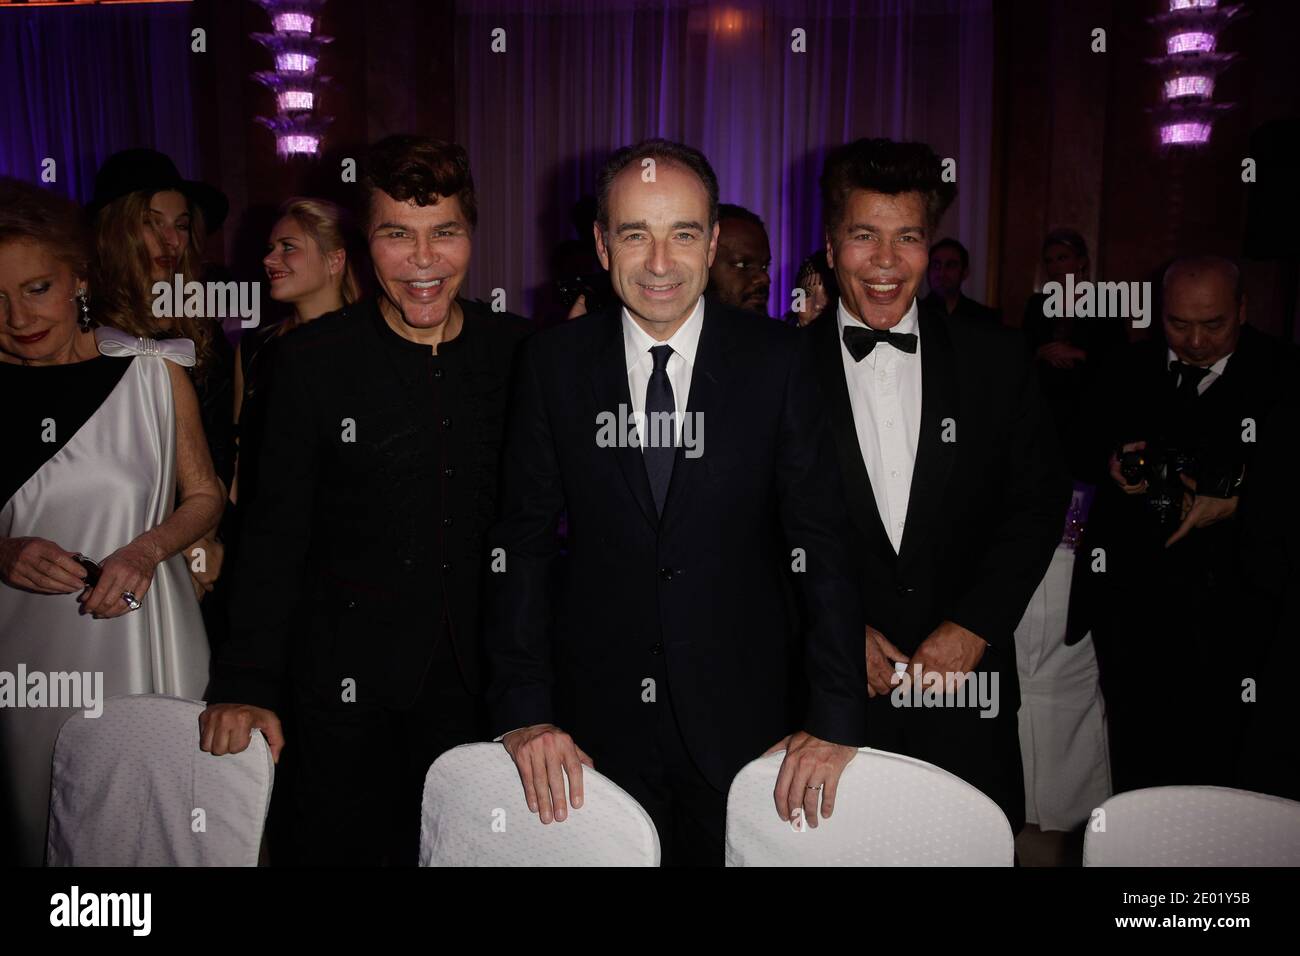 Jean-Francois Cope, Igor and Grichka Bogdanoff attending 'The Best Awards 2013' Ceremony held at Salons Hoche, in Paris, France on December 16, 2013. Photo by Jerome Domine/ABACAPRESS.COM Stock Photo